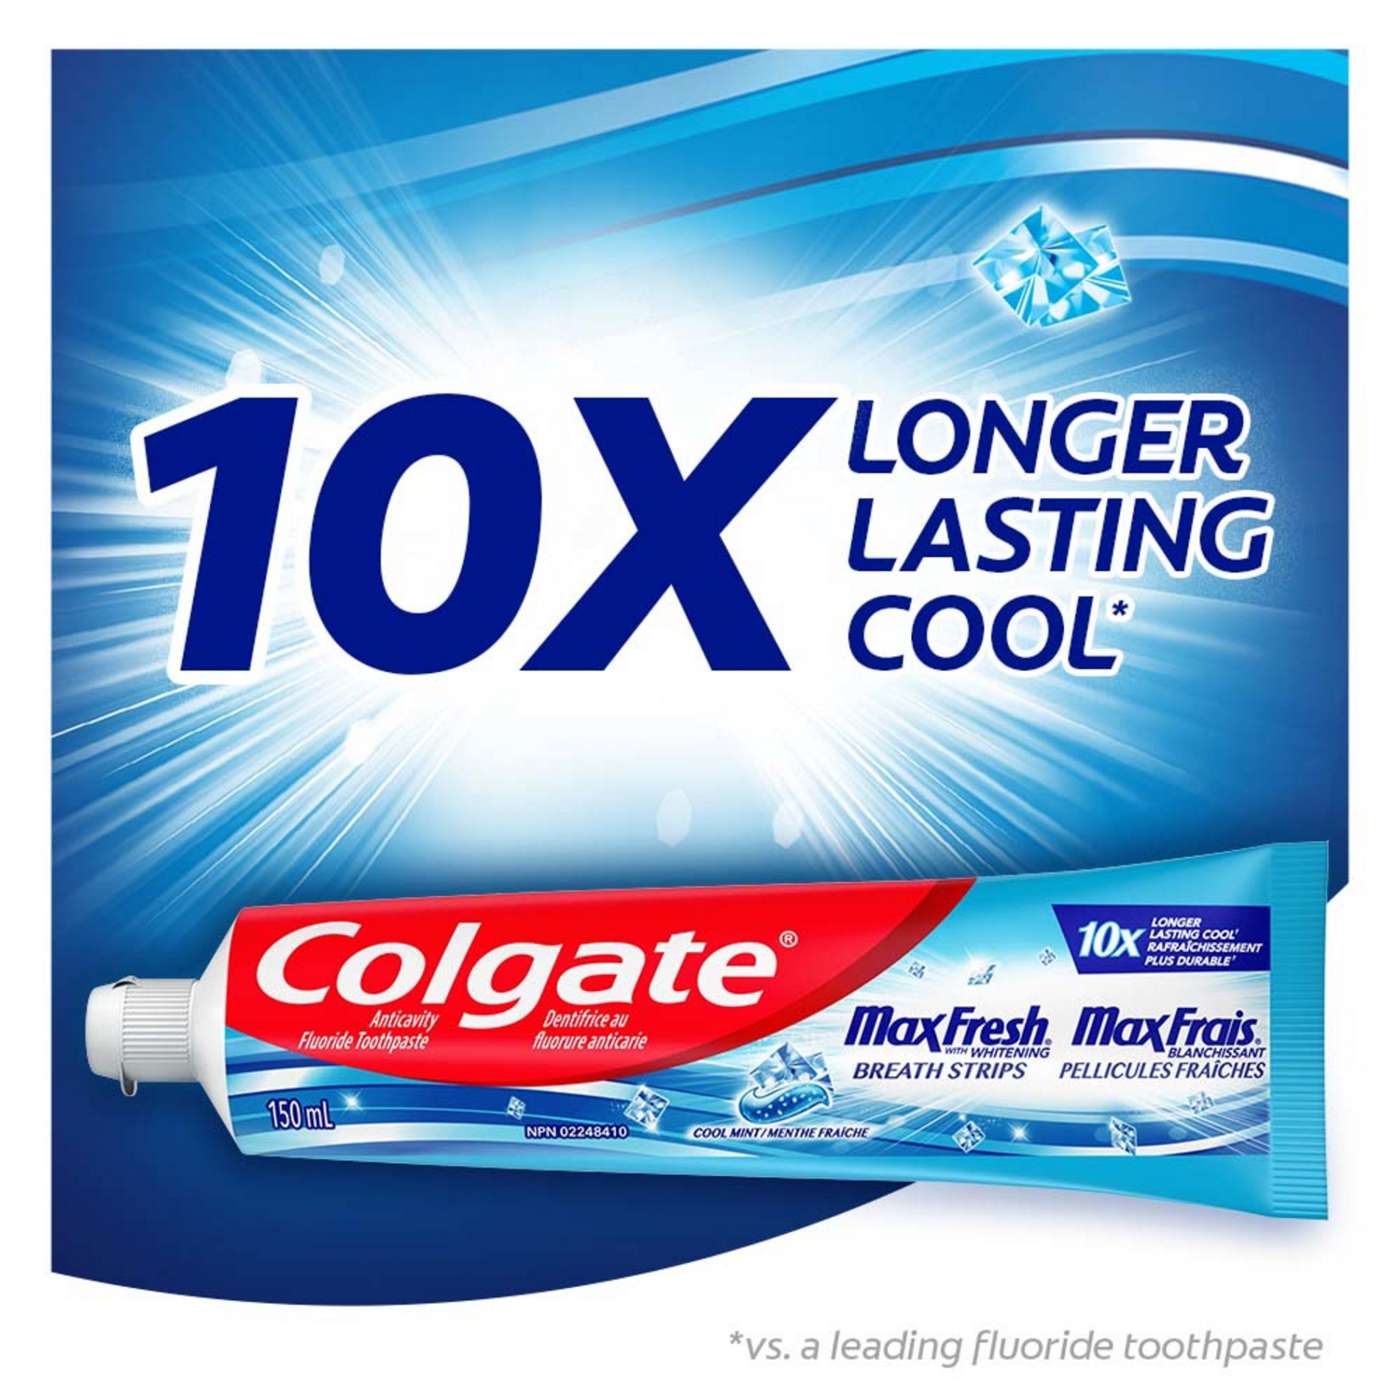 Colgate Max Fresh Anticavity Toothpaste 2 pk - Cool Mint; image 11 of 14